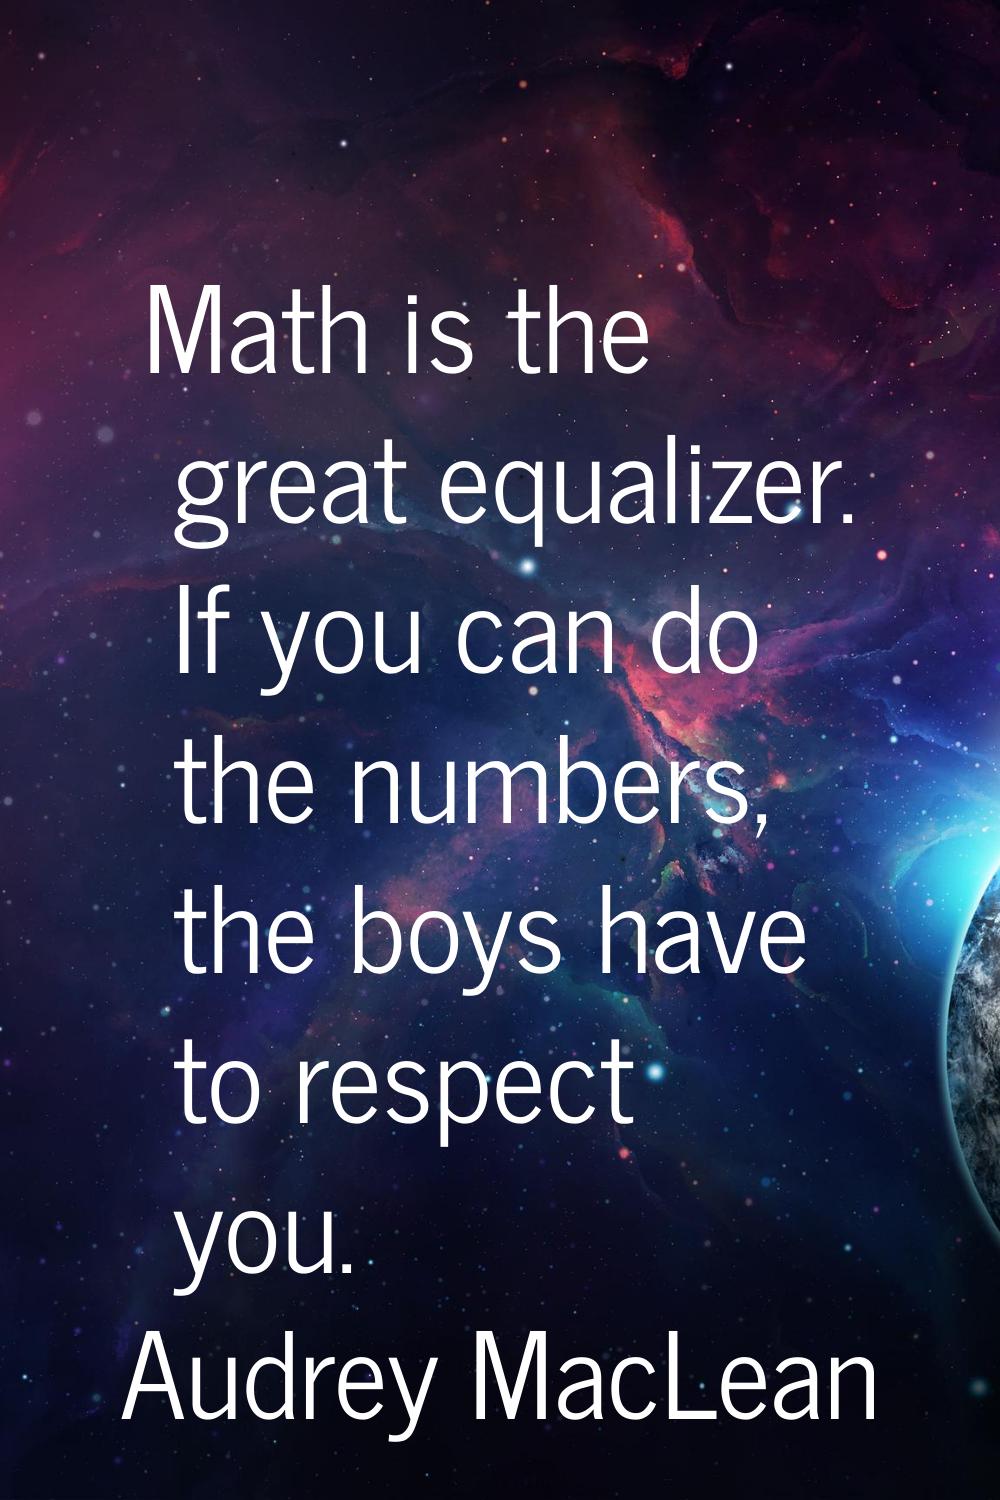 Math is the great equalizer. If you can do the numbers, the boys have to respect you.